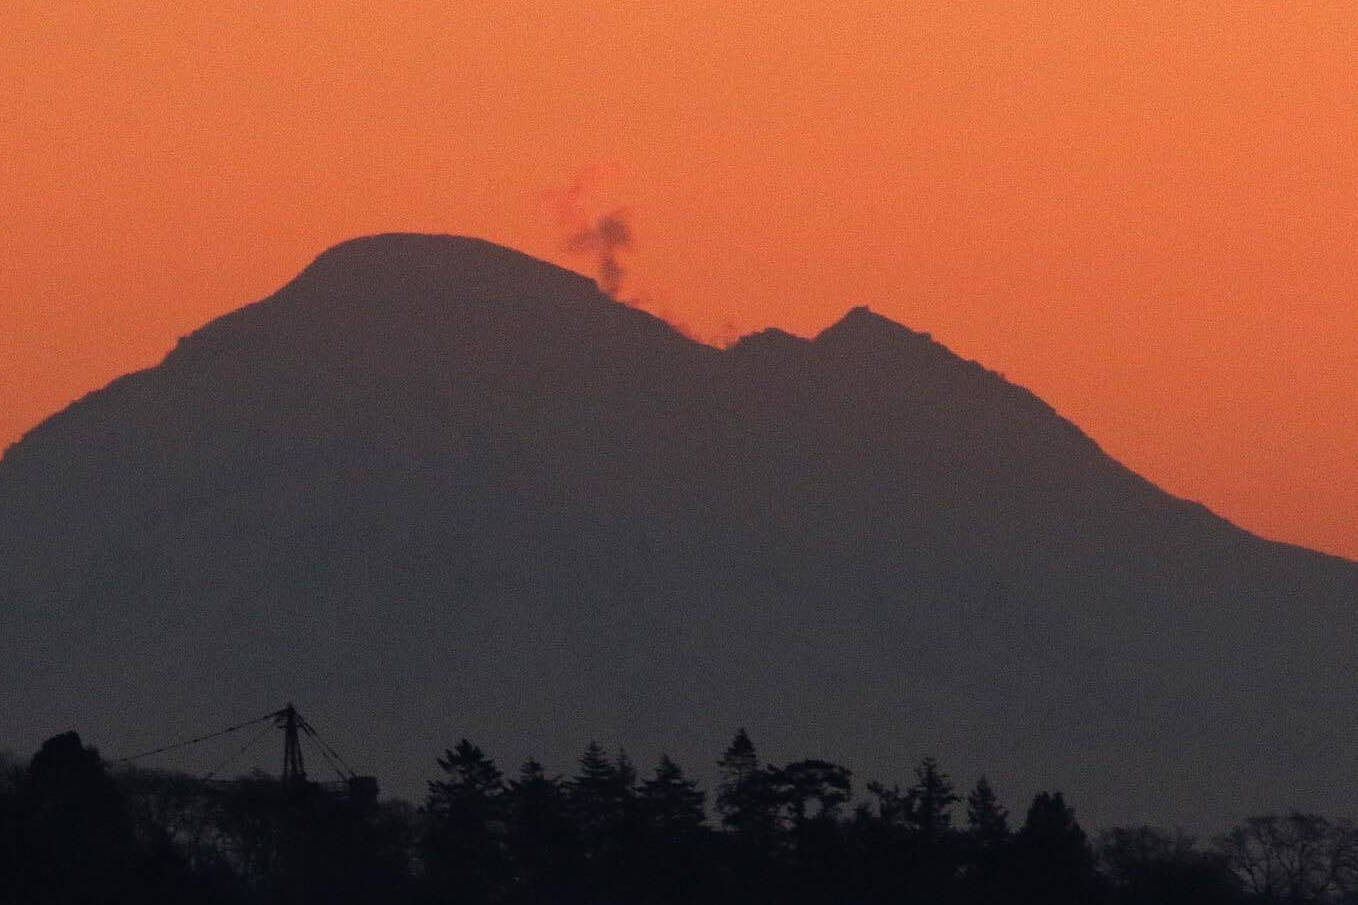 Mount Baker vents regularly with steam visible depending on weather. (Photo by Gary Woodburn)